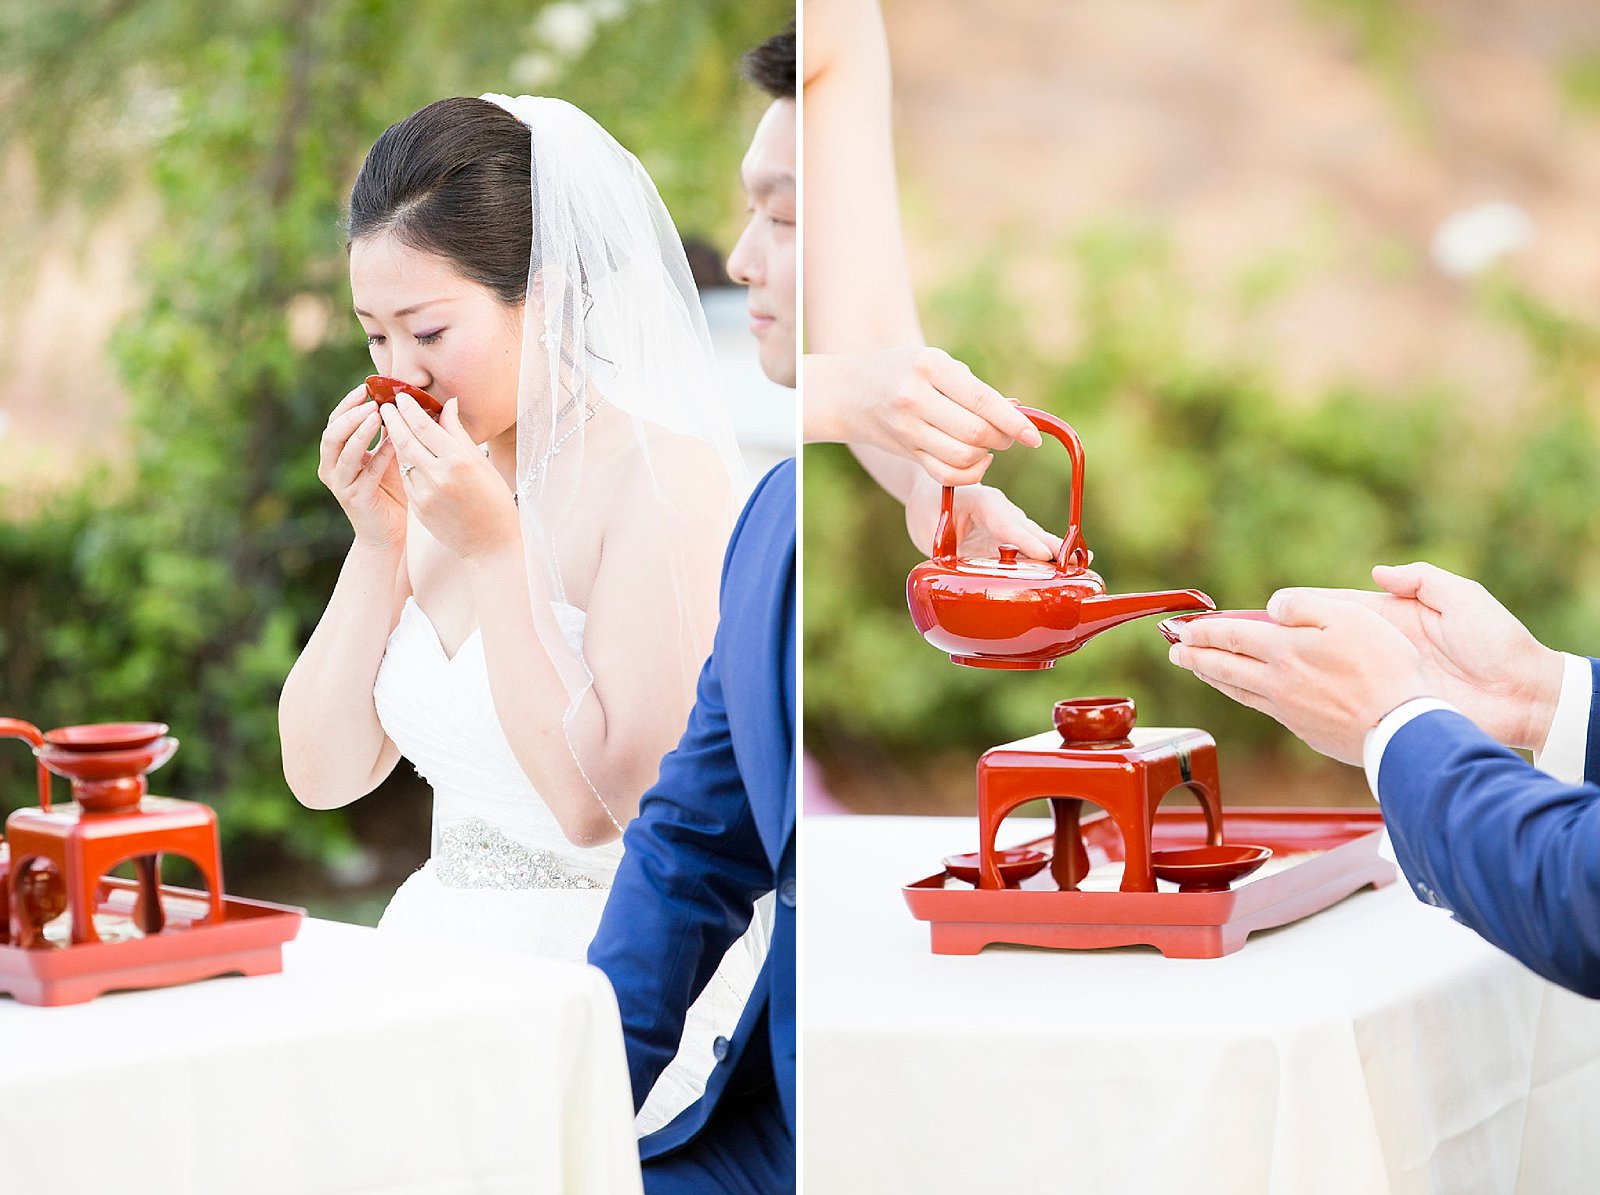 Japanese tradition of exchanging Sake during wedding ceremony photographed by Randi Michelle Photography